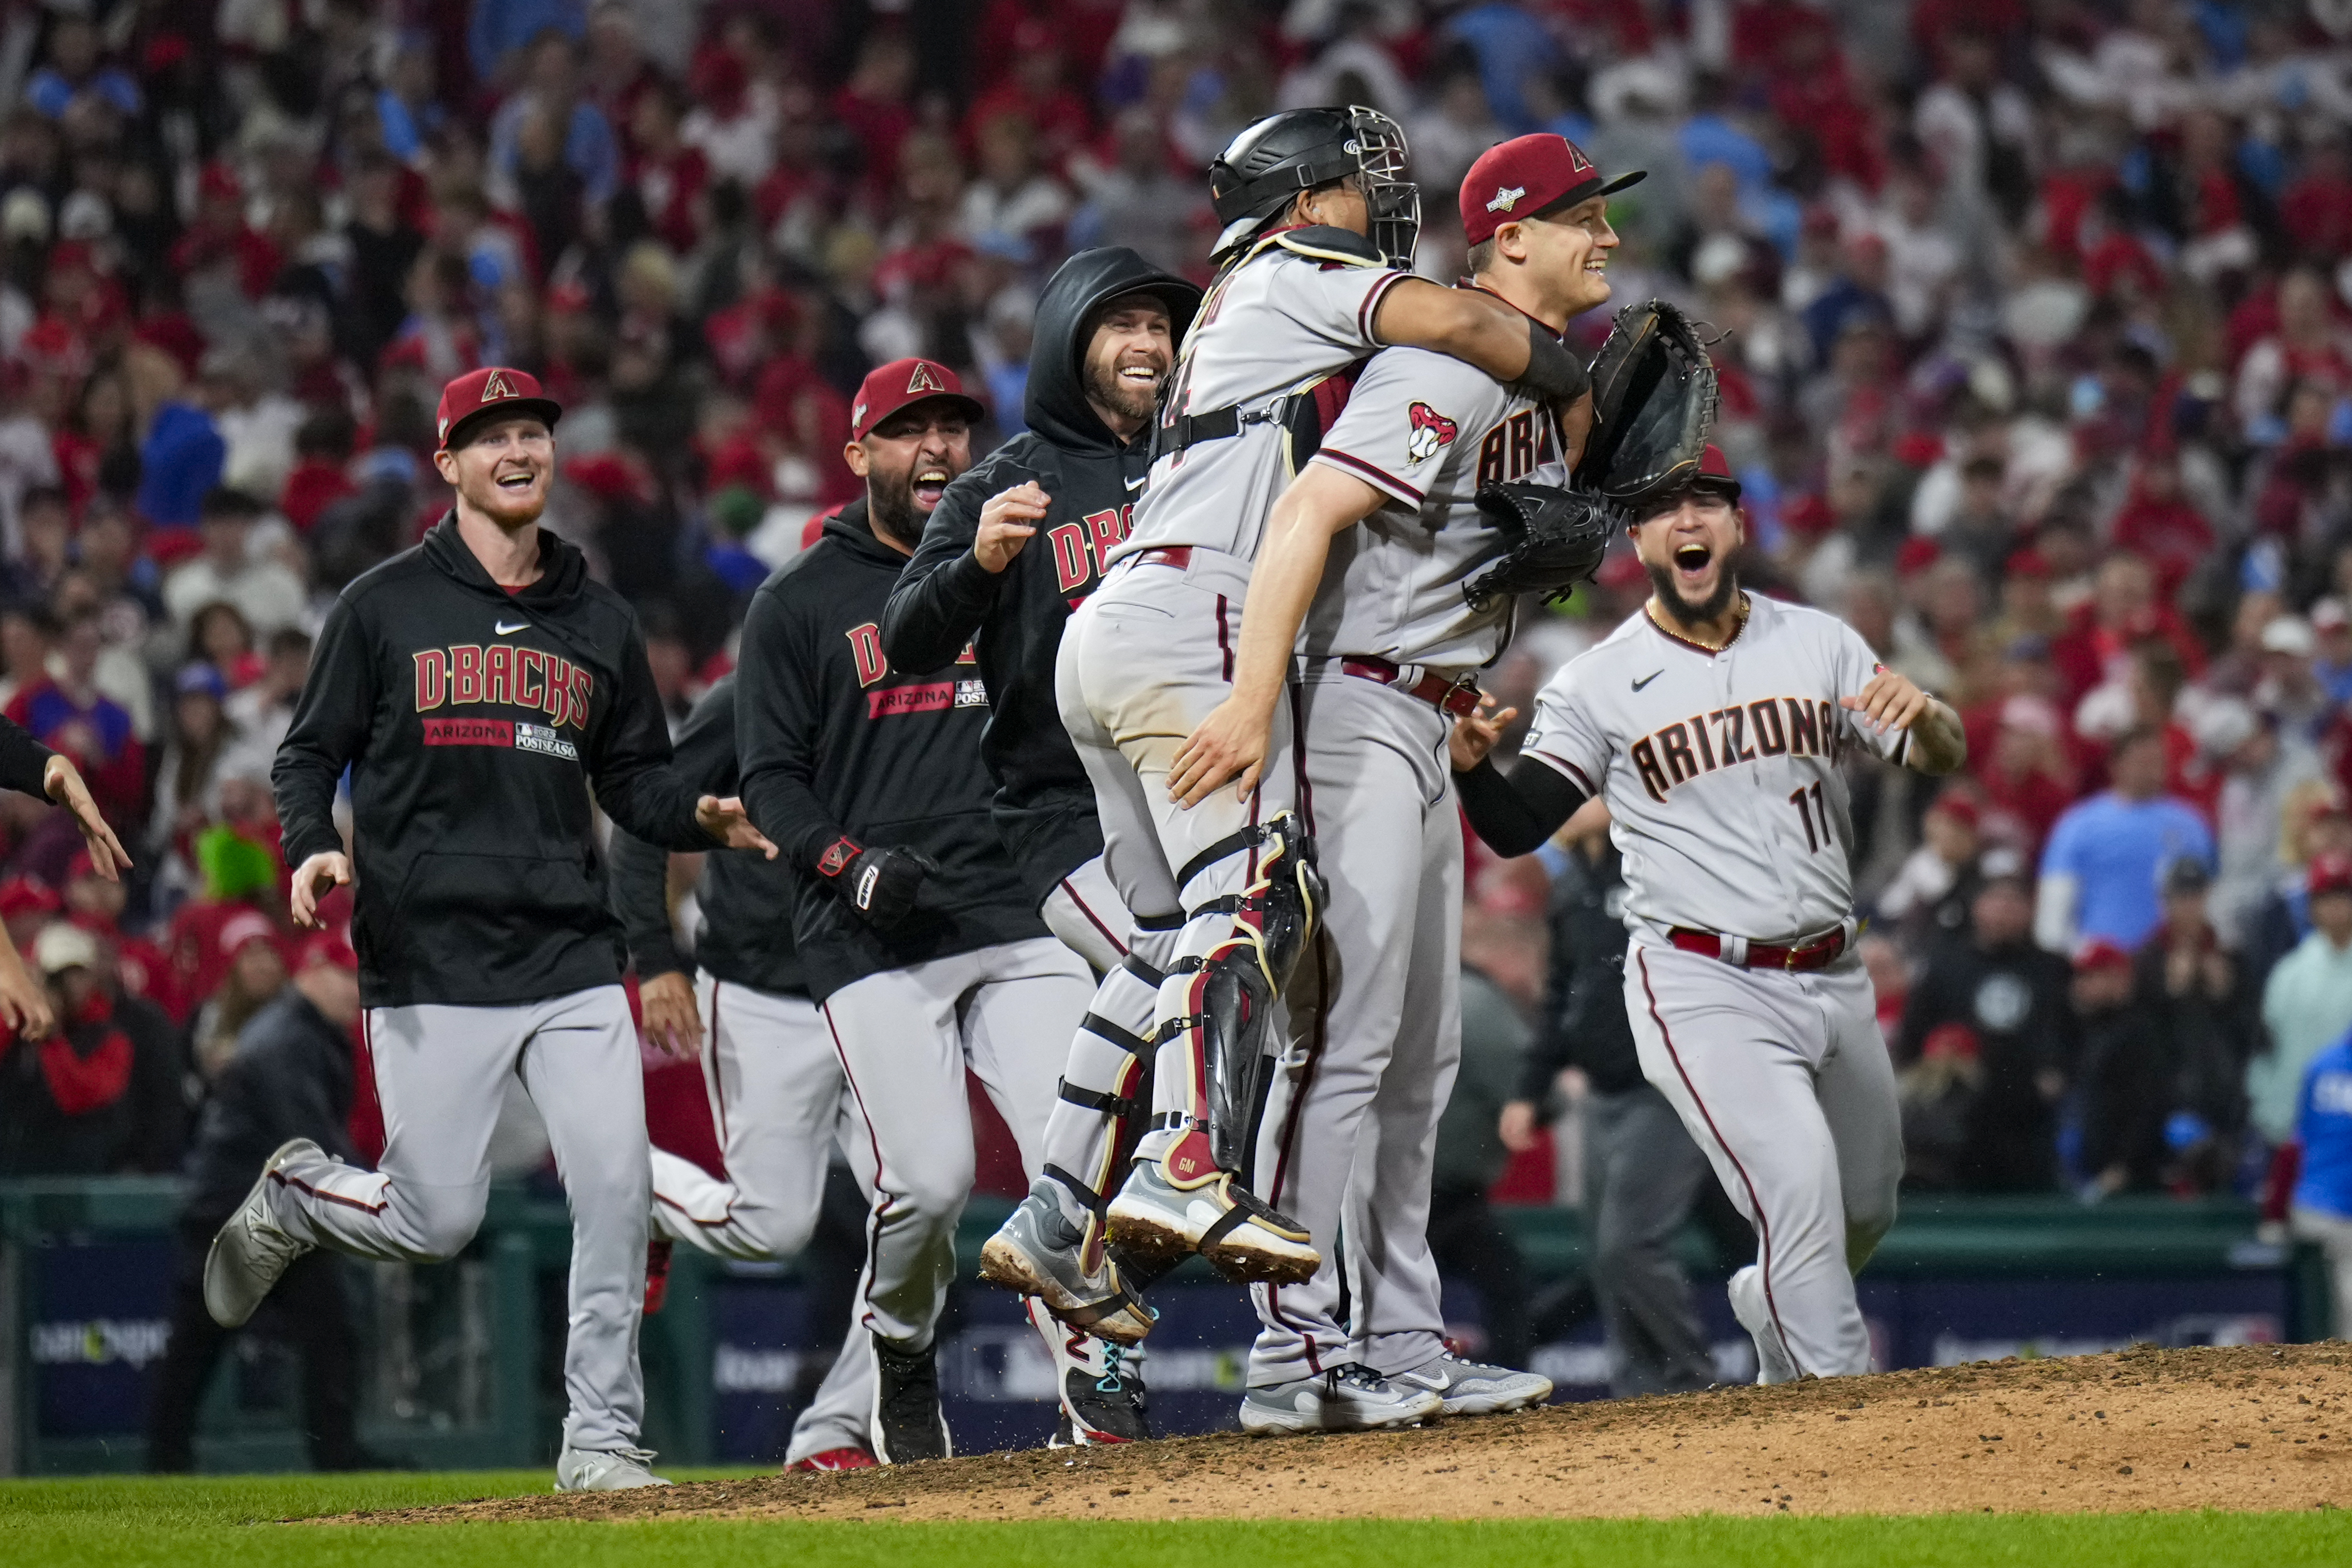 Diamondbacks rally again to eliminate Brewers, book spot in NLDS